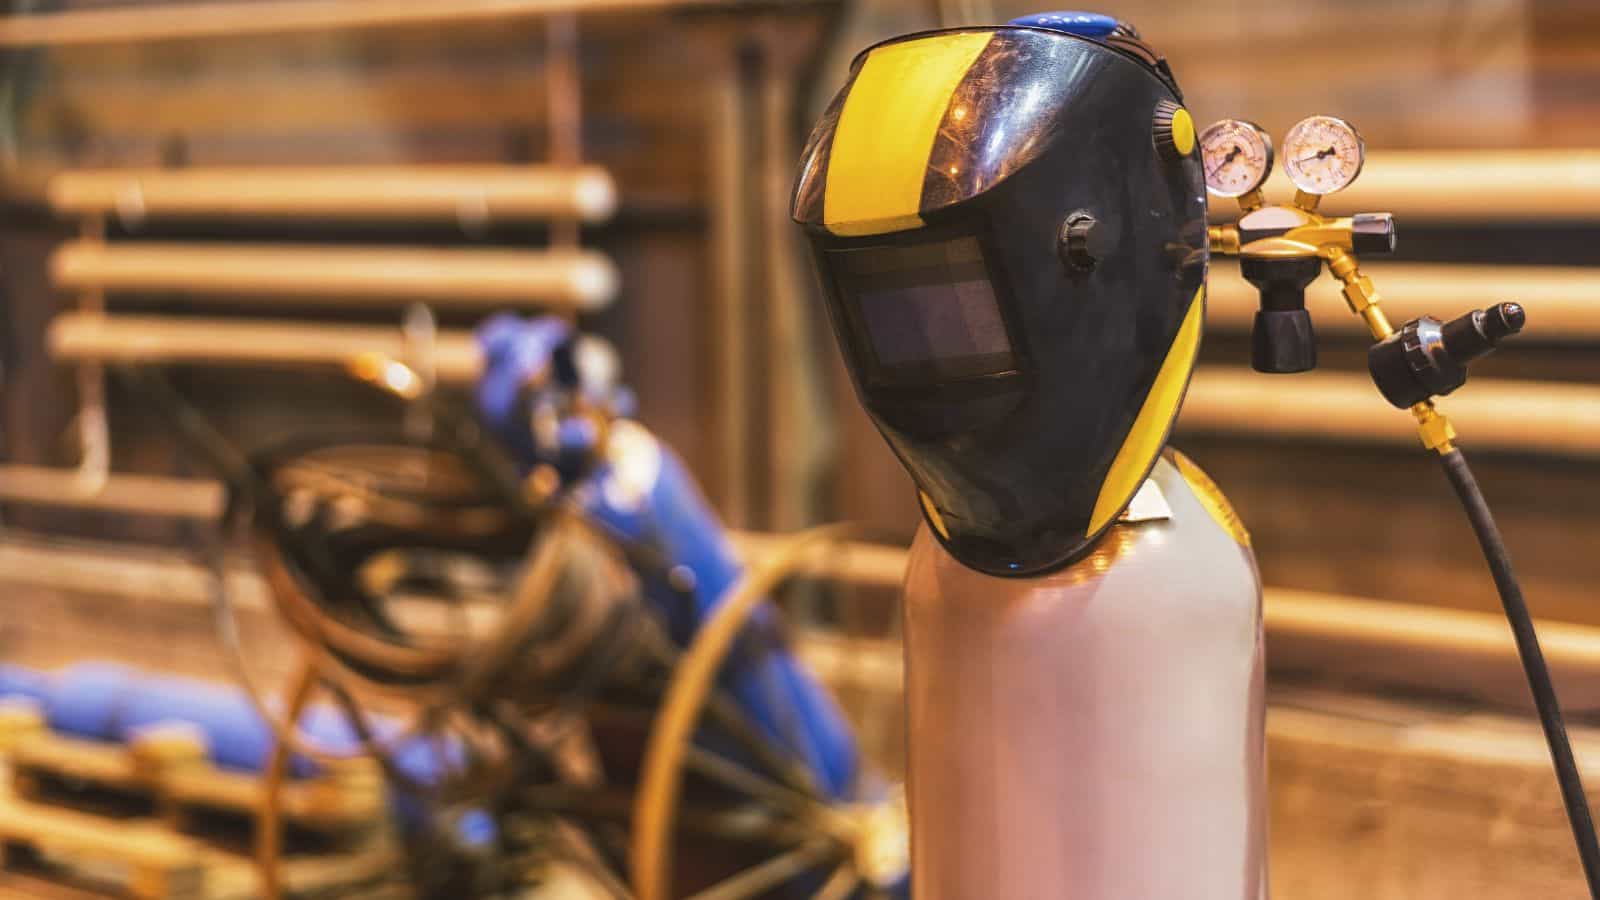 A welding mask hangs on equipment due to downtime in manufacturing.